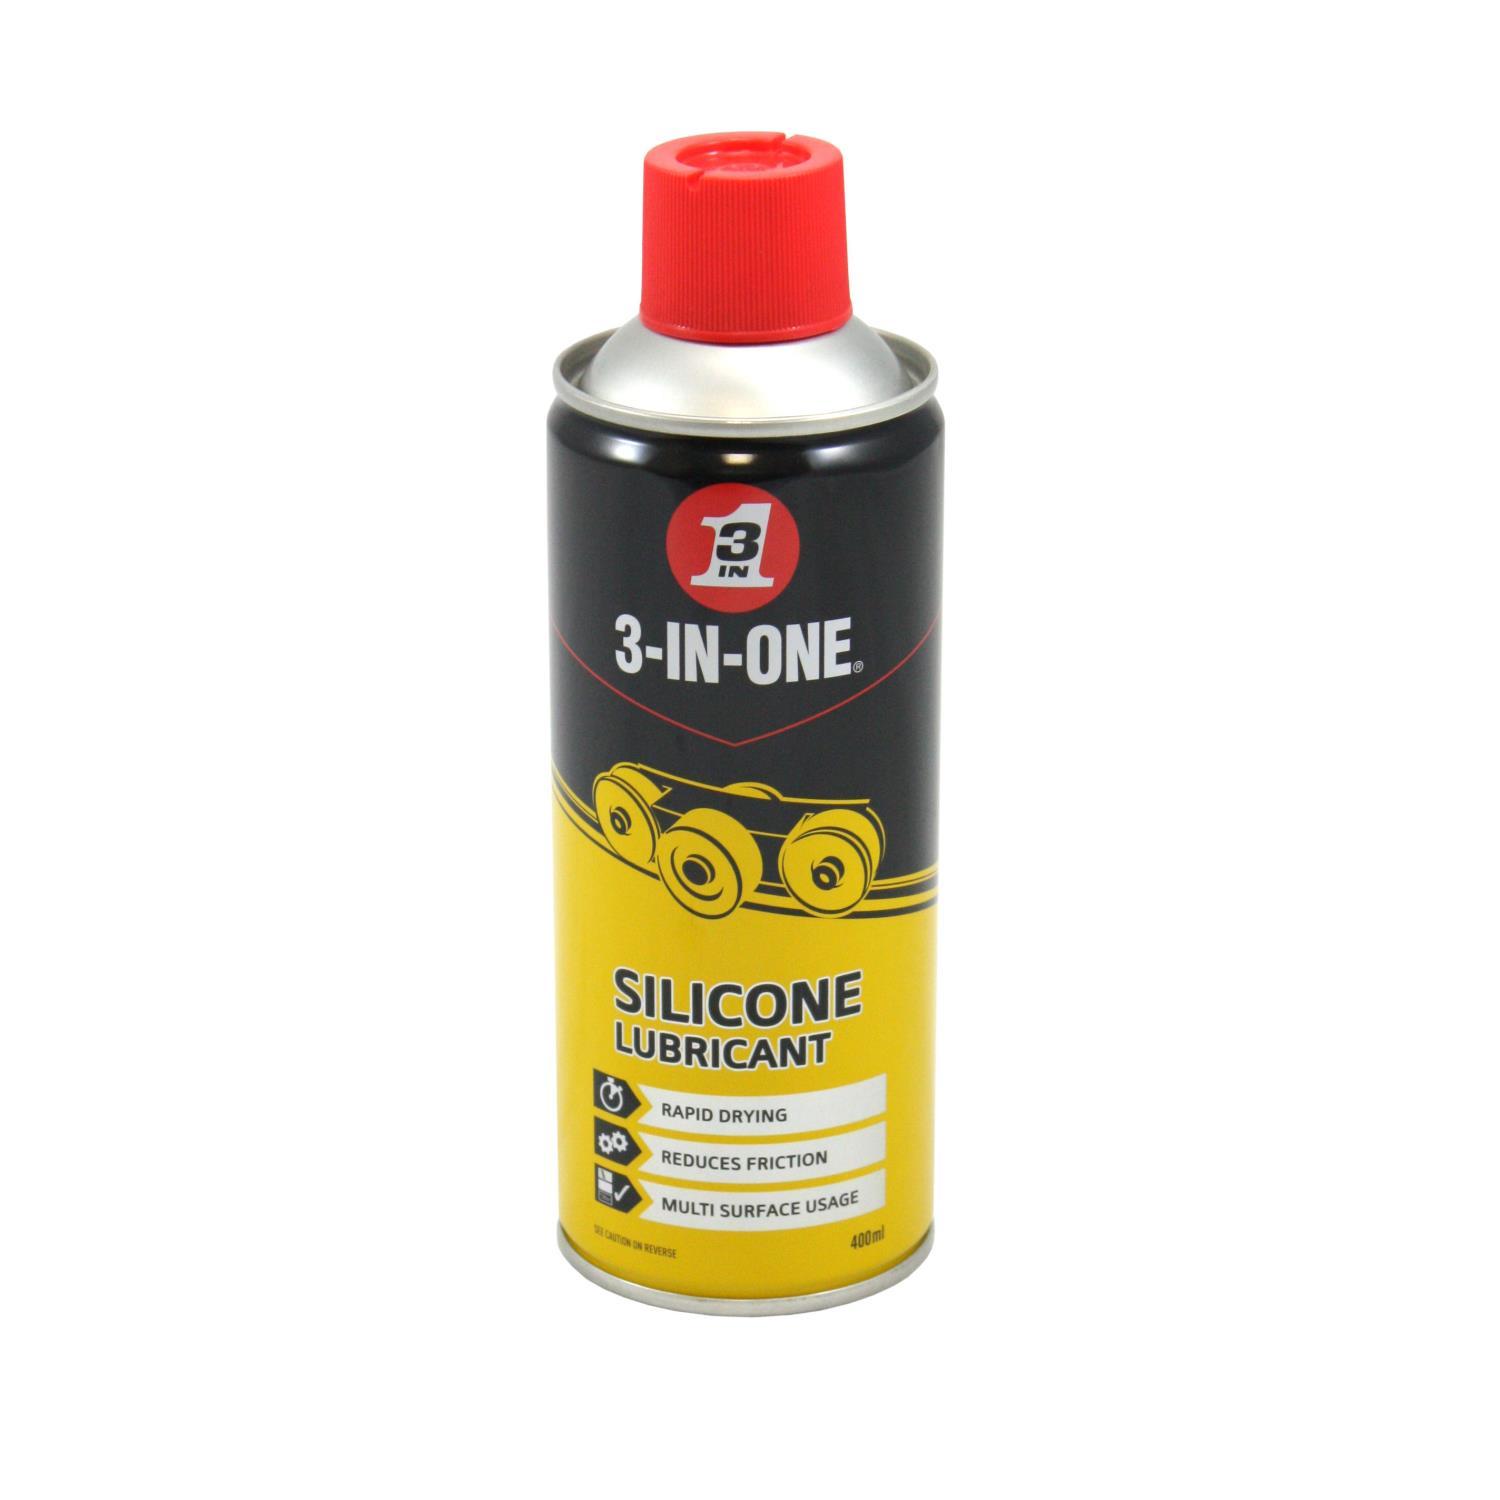 3 in 1 lubricant spray